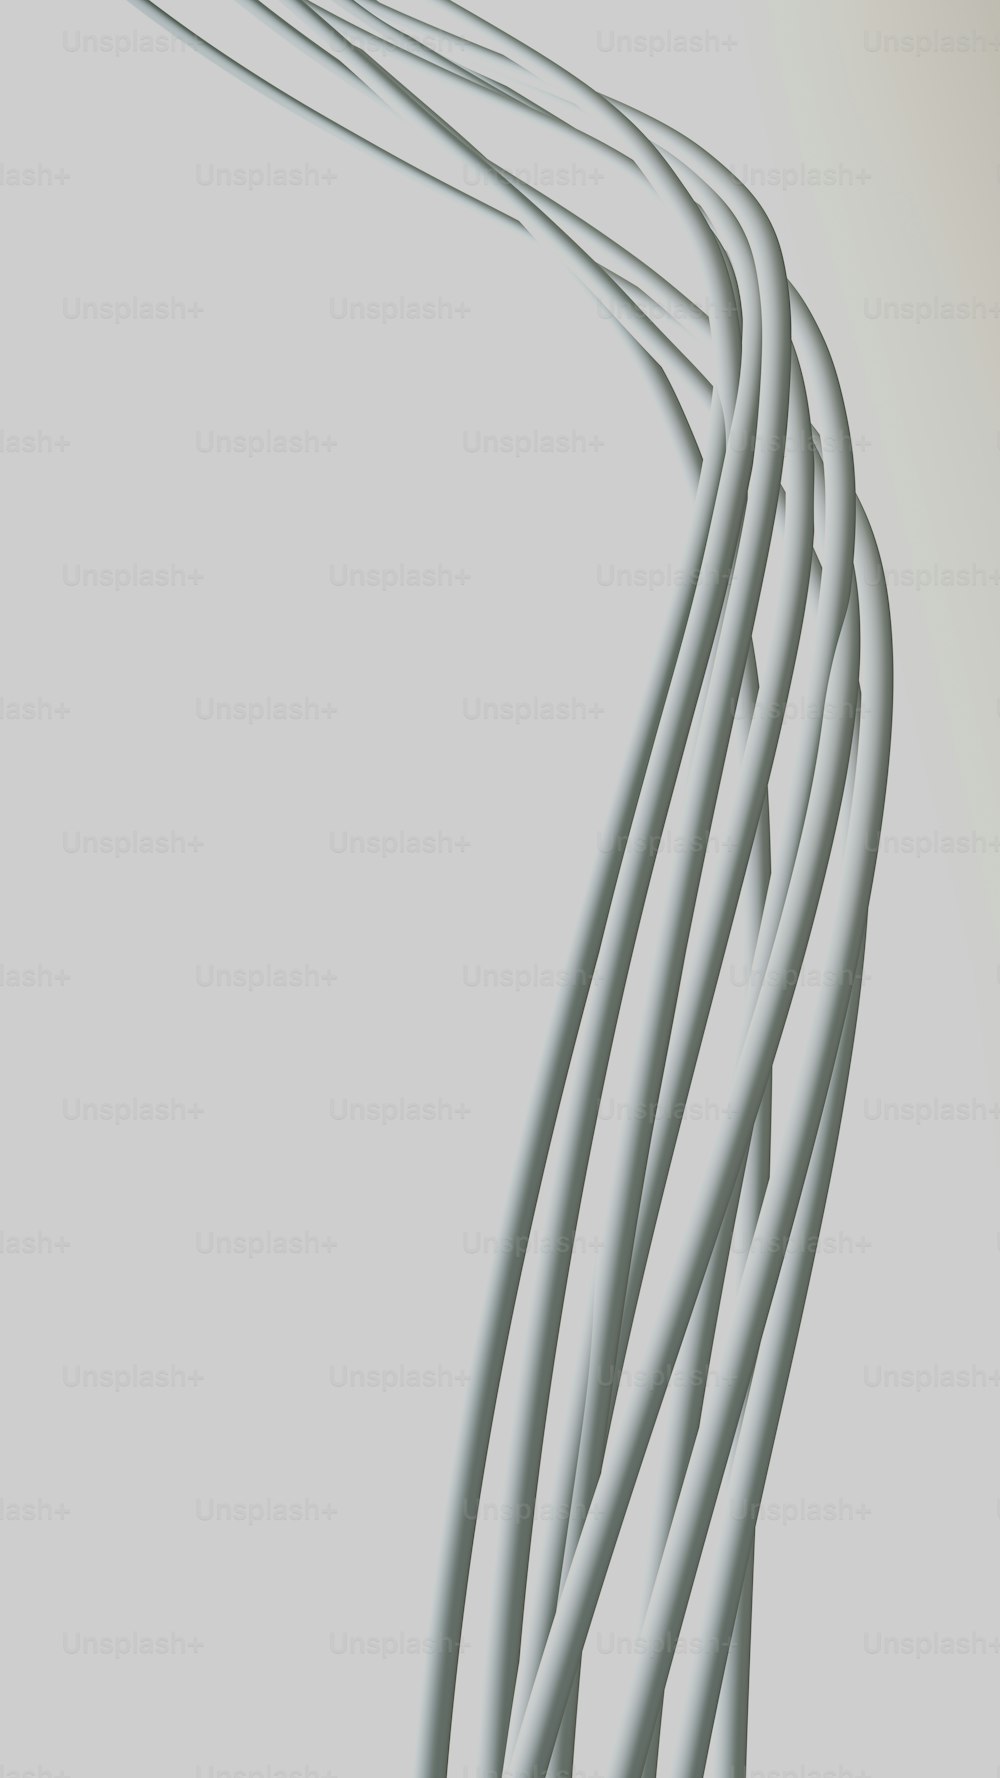 a long line of white wires on a gray background